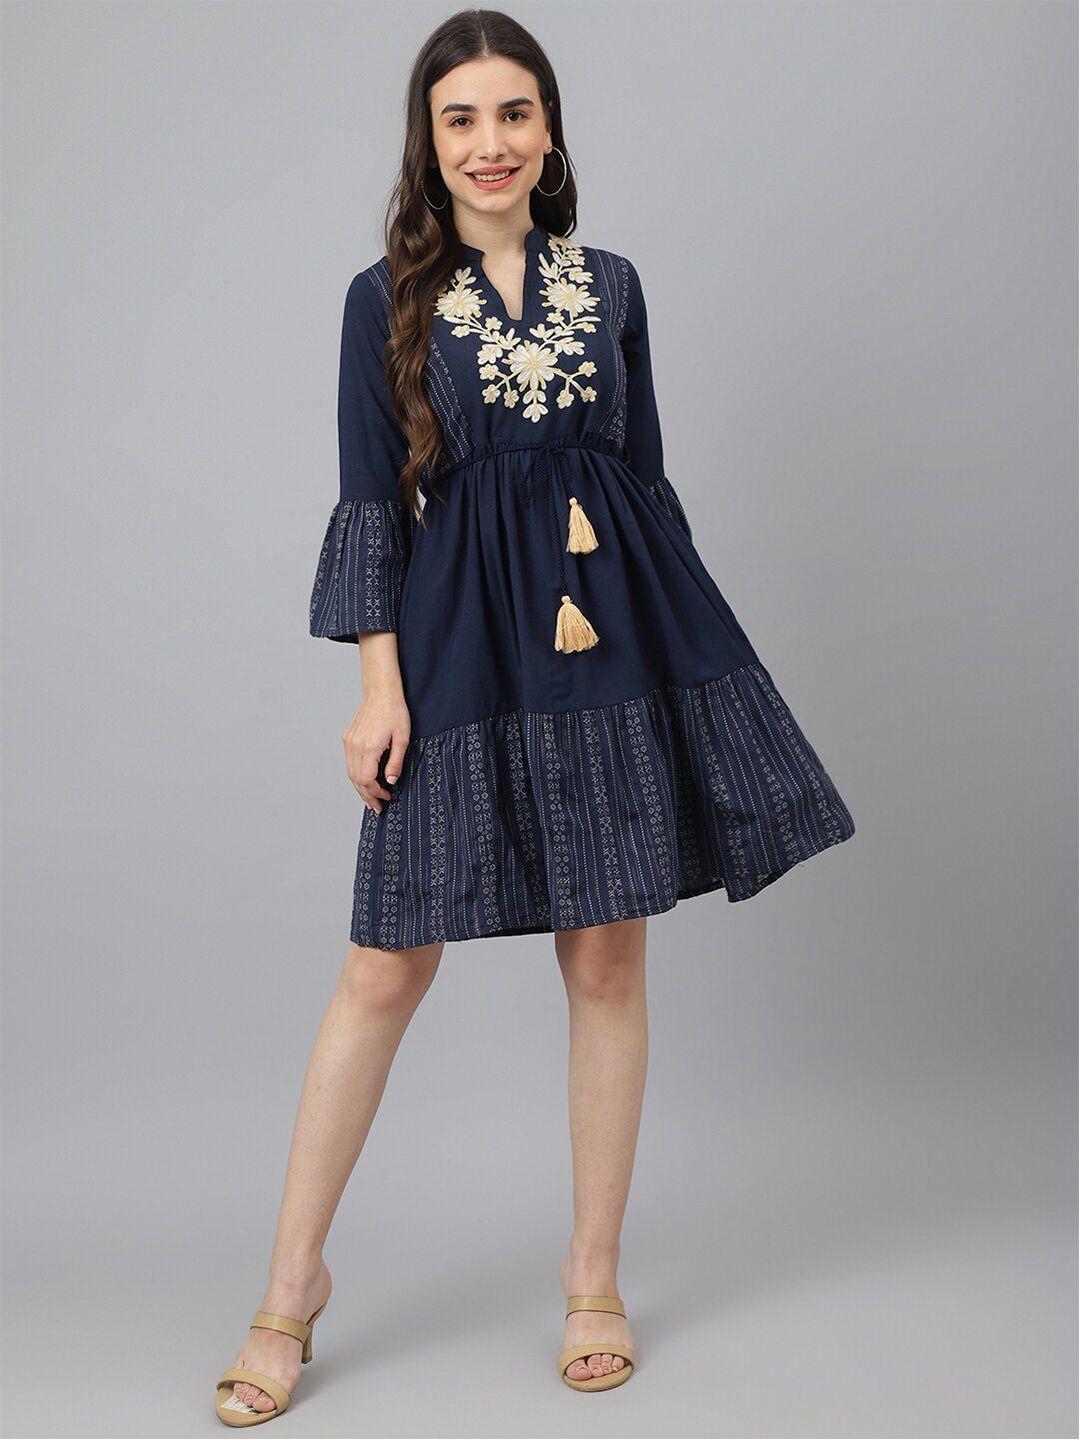 adaa jaipur navy blue floral embroidered bell sleeves women cotton dress